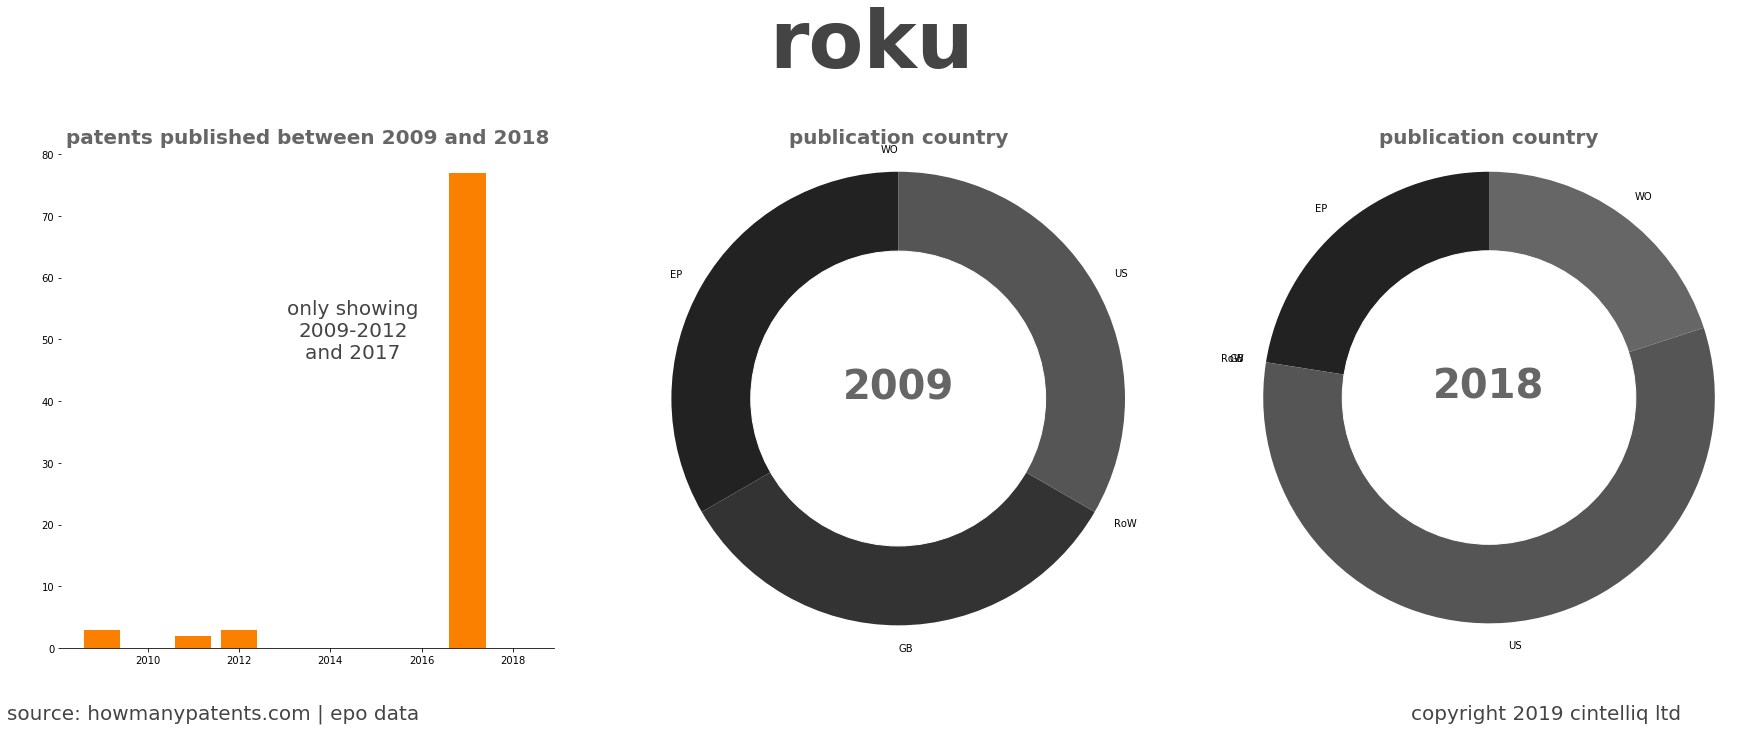 summary of patents for Roku